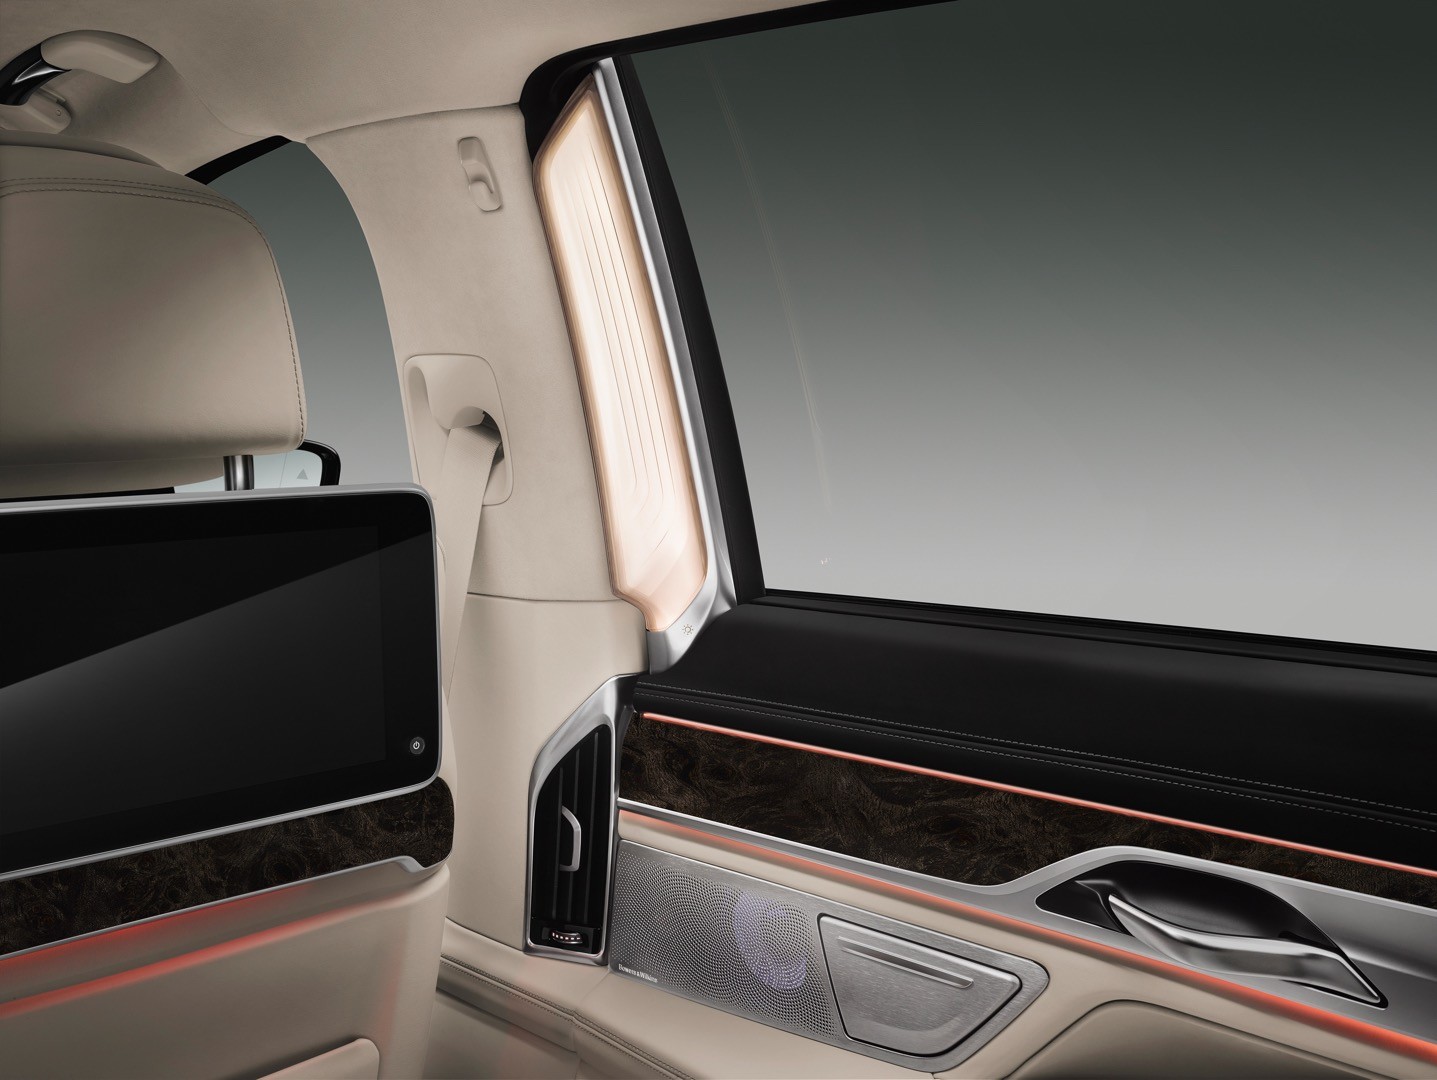 2016-bmw-7-series-finally-officially-unveiled-the-good-stuffs-inside-photo-gallery_114